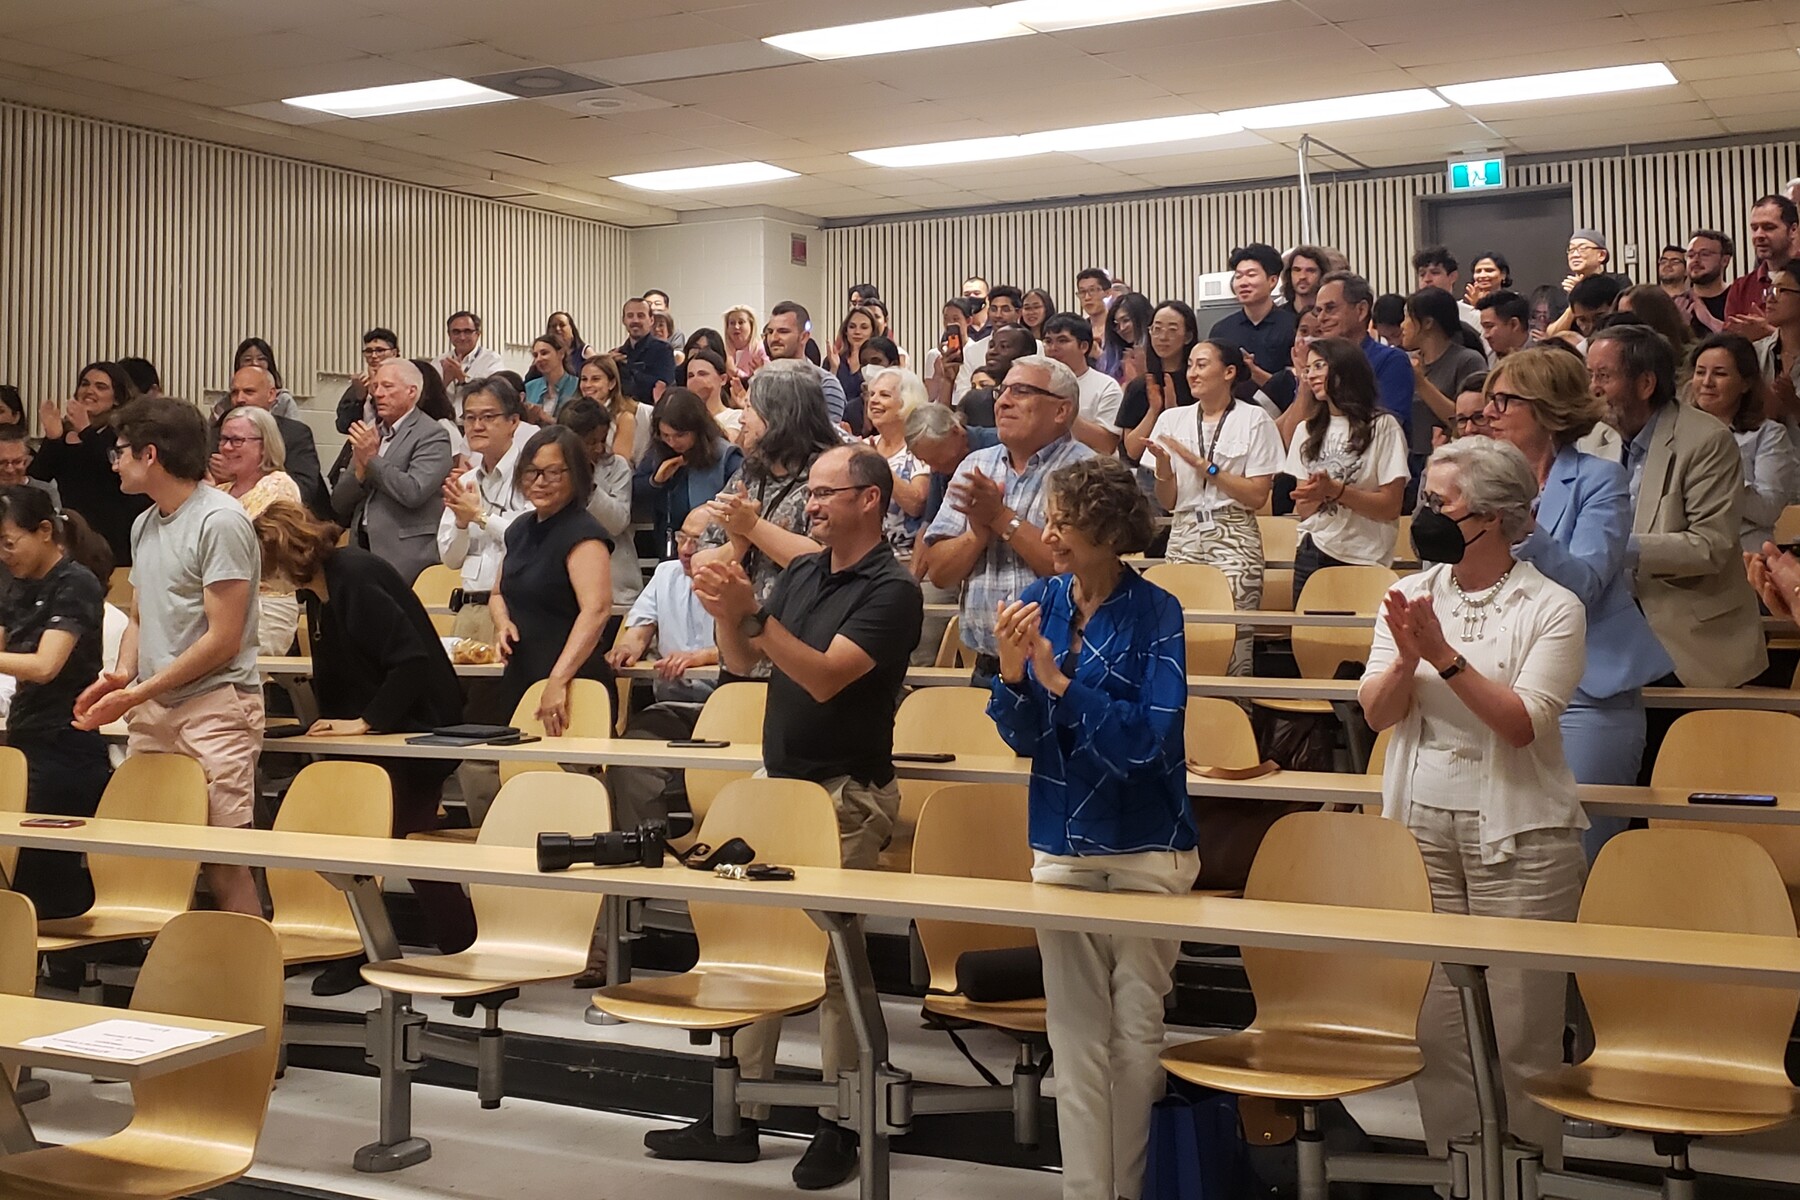 Audience giving a standing ovation for Dr. Brubaker's talk in a lecture theatre